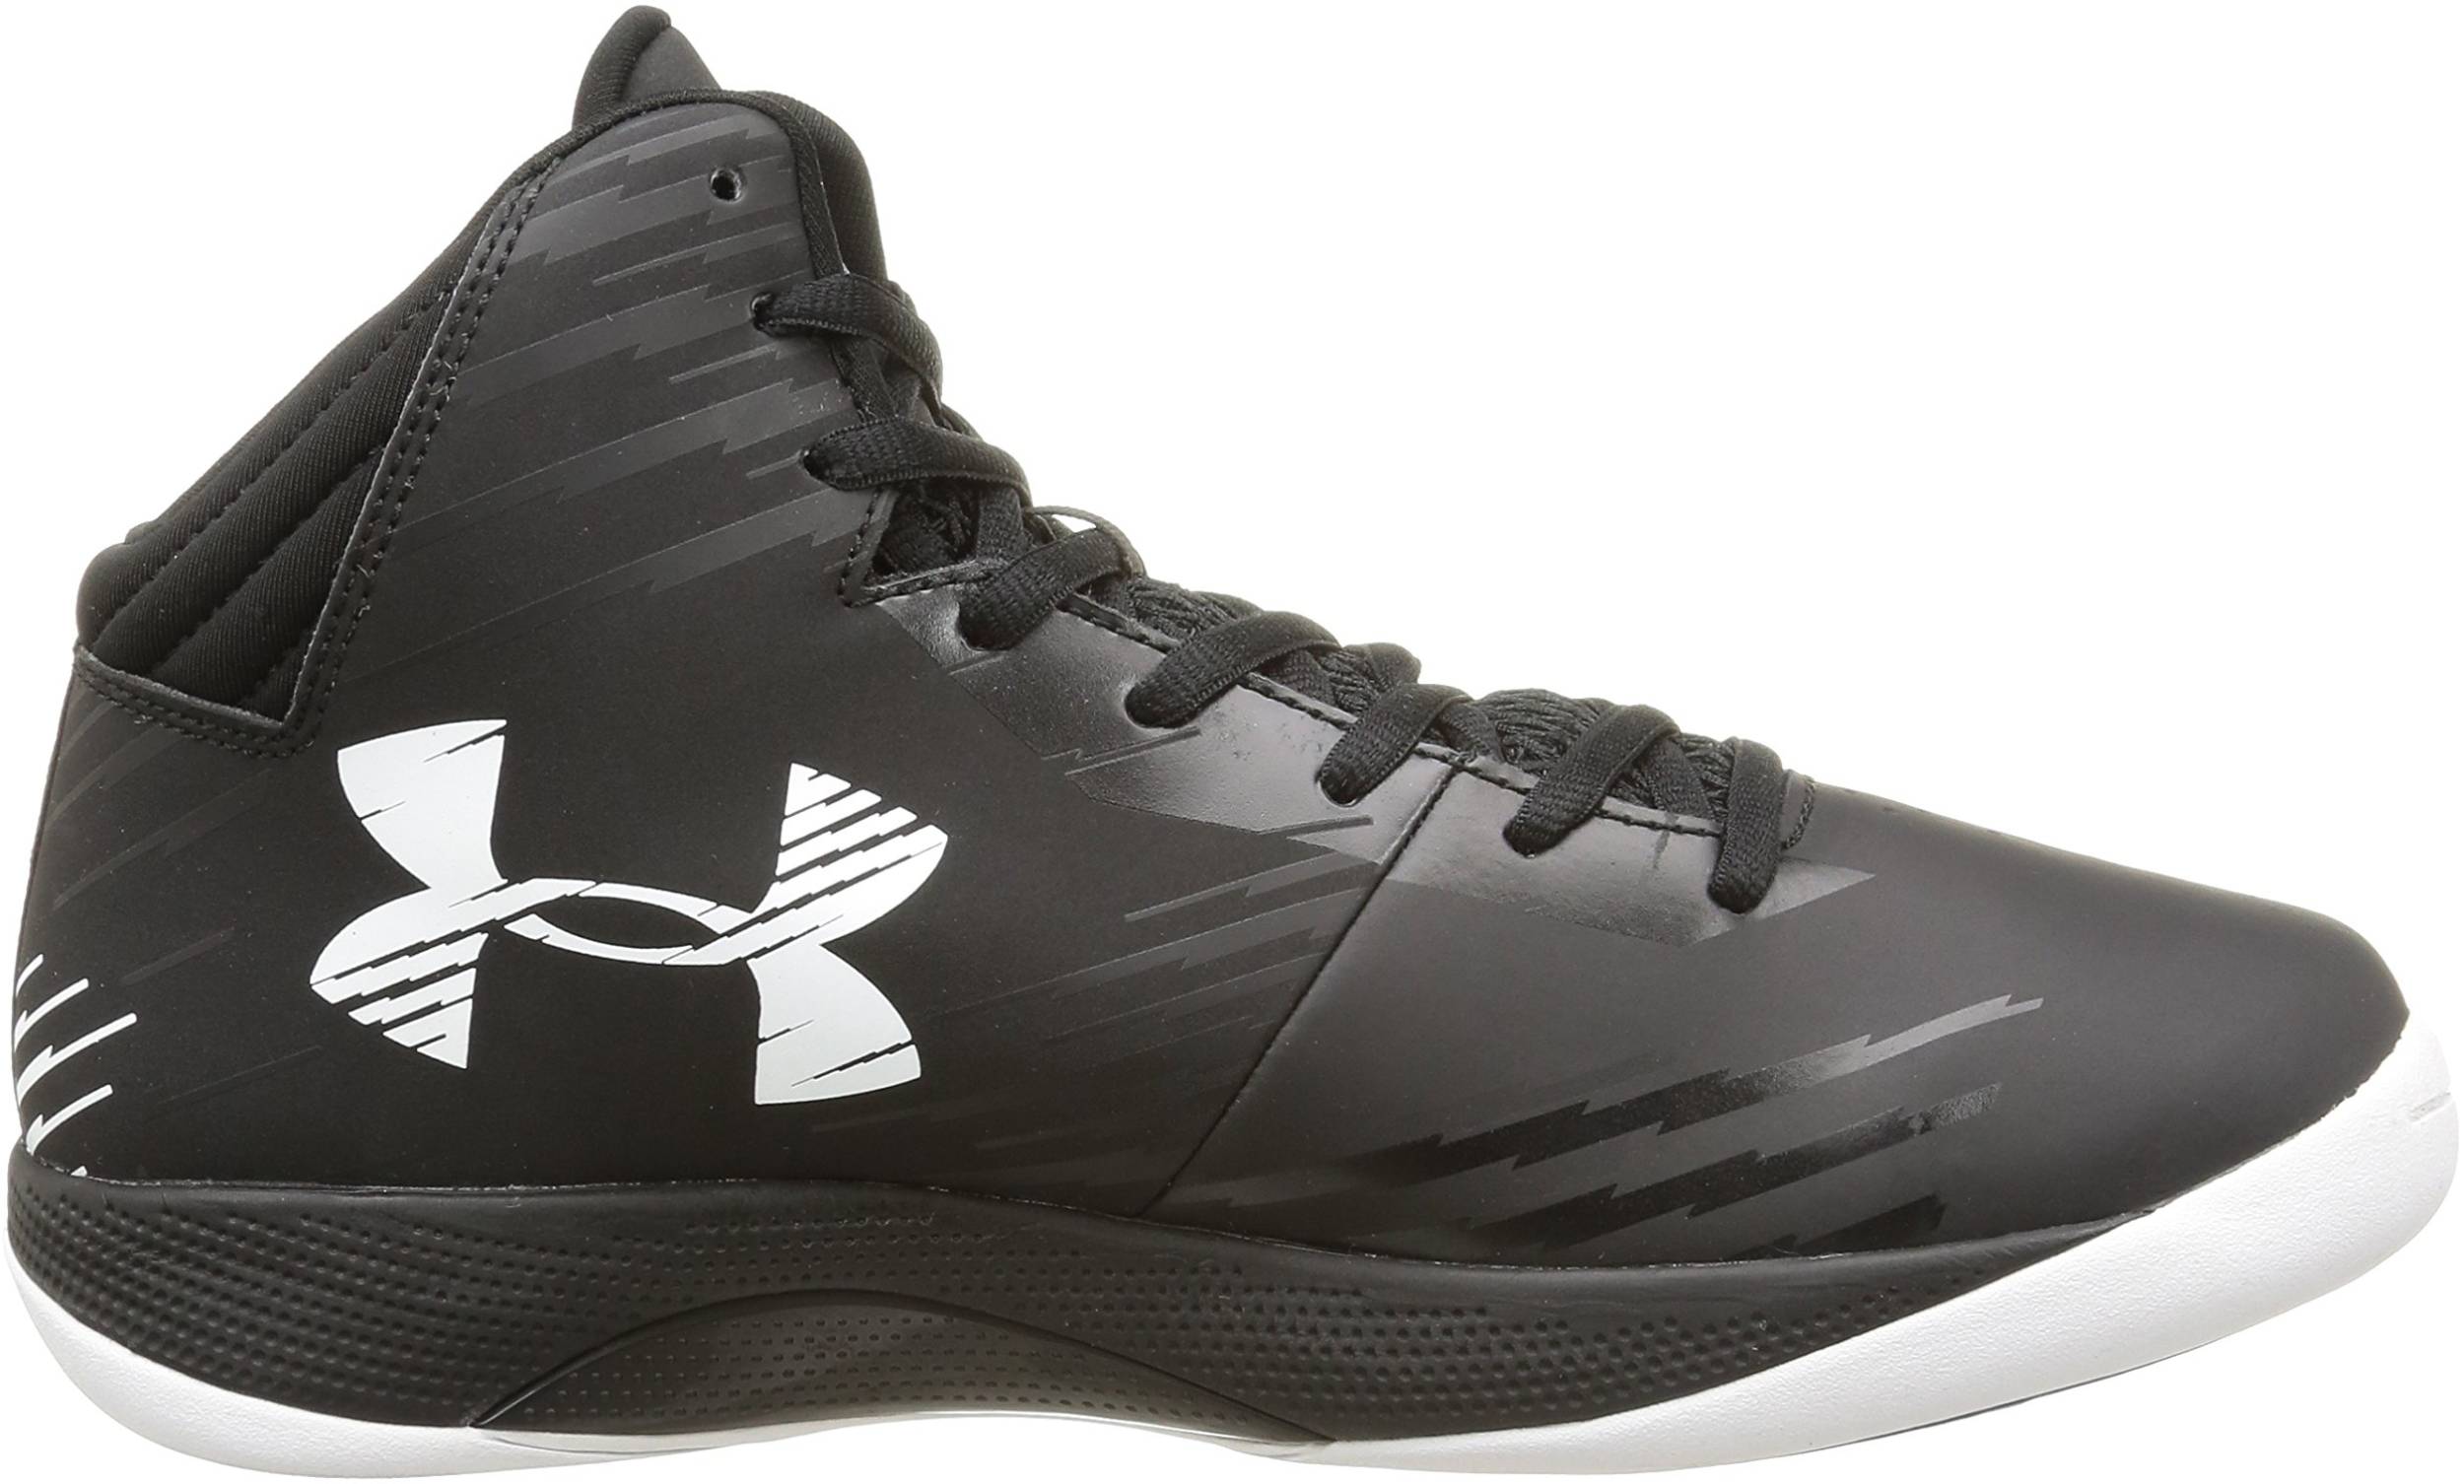 Under Armour Basketball Shoes 